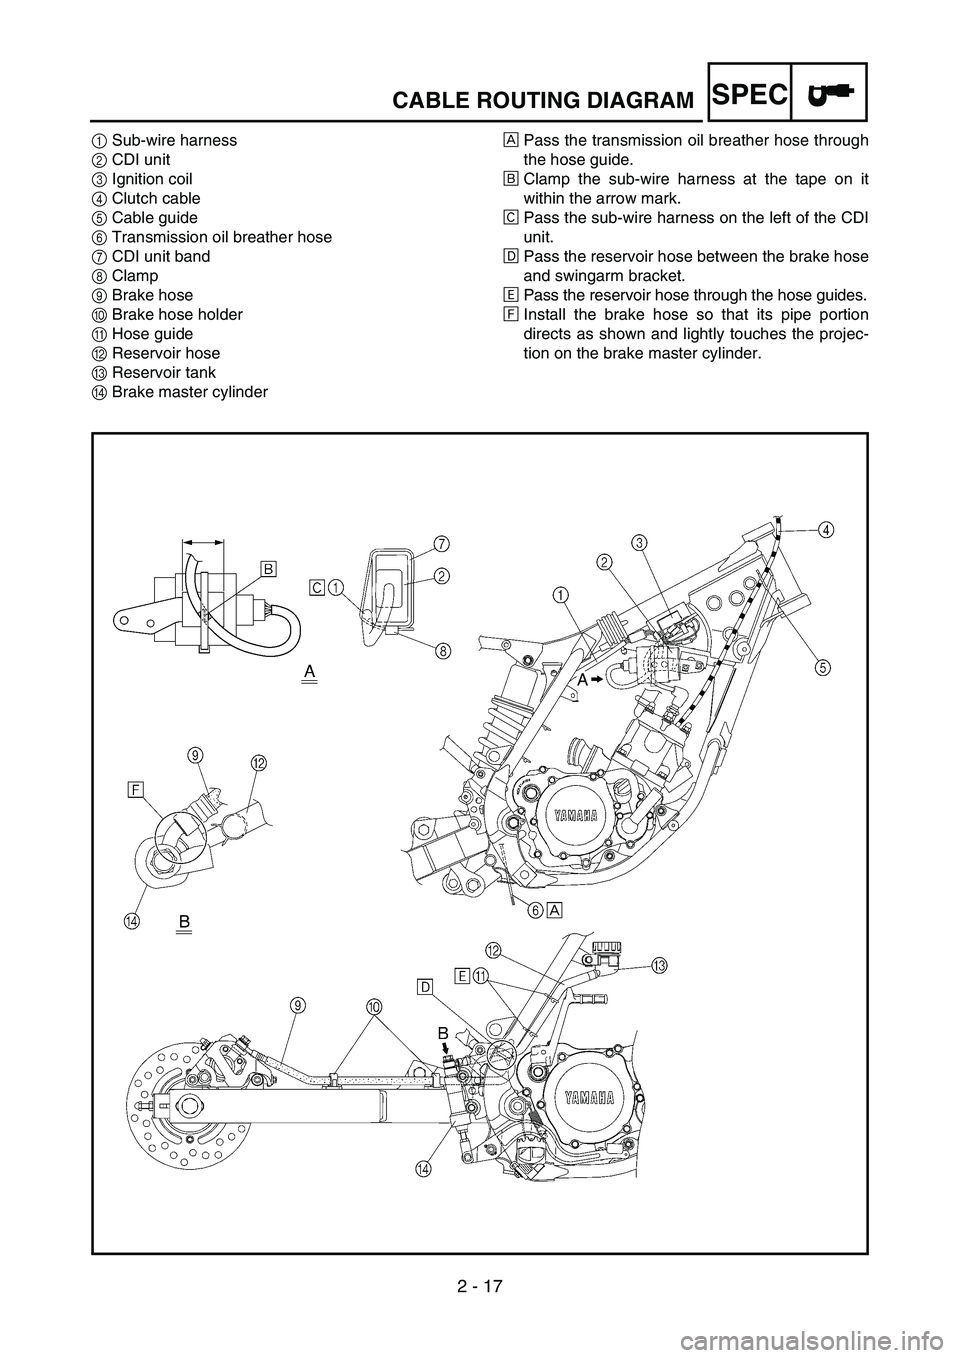 YAMAHA YZ85 2006  Owners Manual 2 - 17
SPEC
1Sub-wire harness
2CDI unit
3Ignition coil
4Clutch cable
5Cable guide
6Transmission oil breather hose
7CDI unit band
8Clamp
9Brake hose
0Brake hose holder
AHose guide
BReservoir hose
CRese